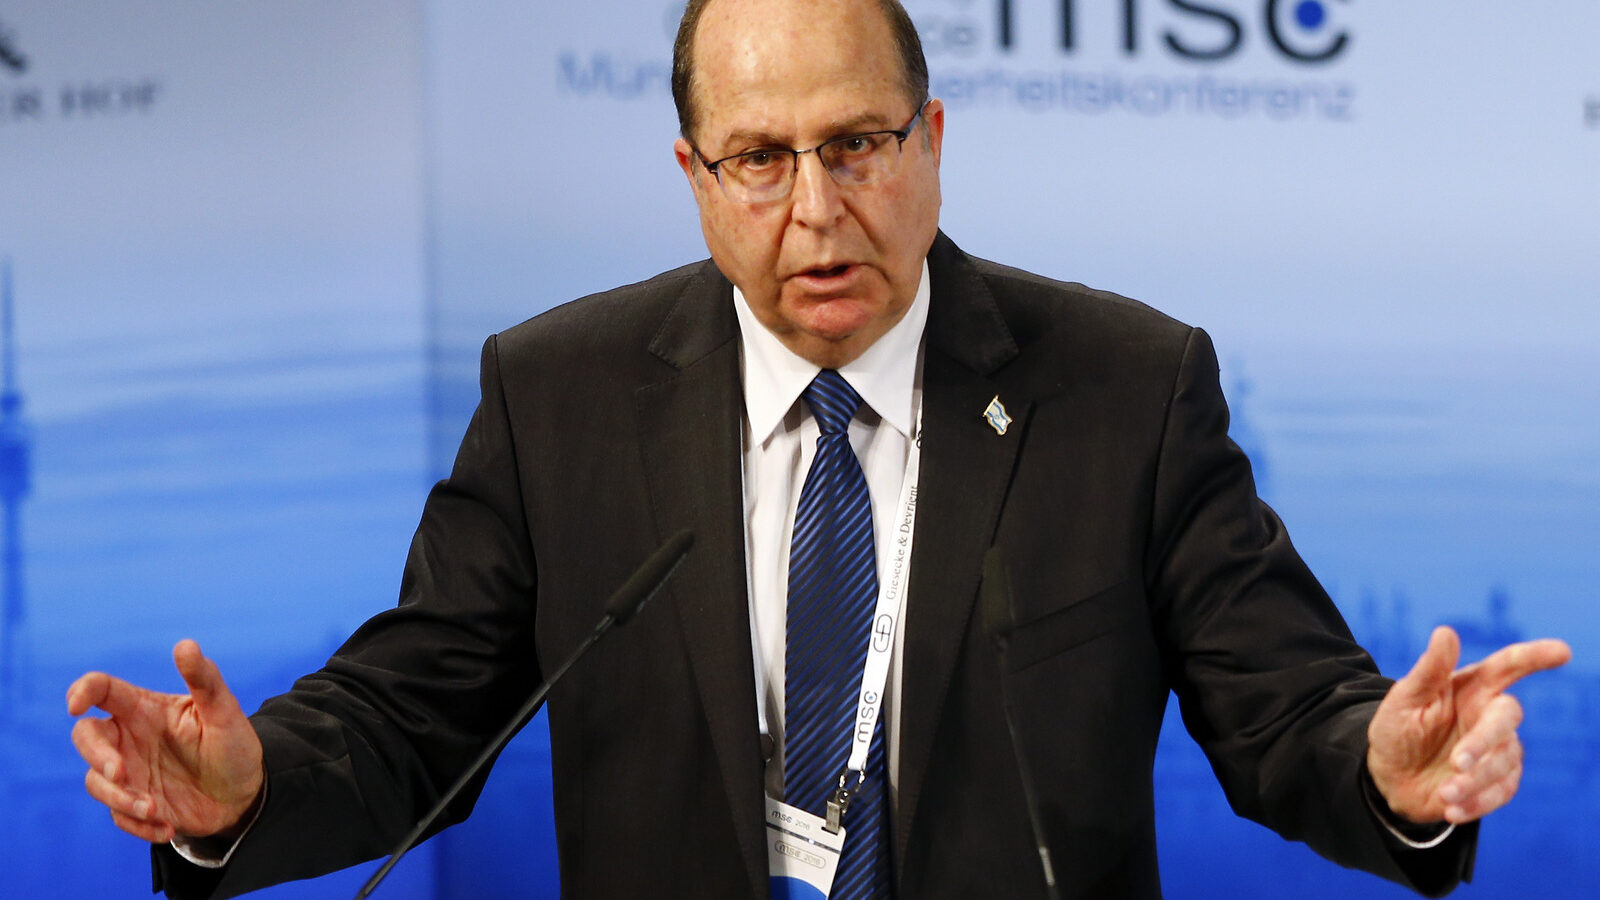 Moshe Yaalon, Defence Minister of Israel, gestures during his speech at the Security Conference in Munich, Germany, Sunday, Feb. 14, 2016. (AP Photo/Matthias Schrader)